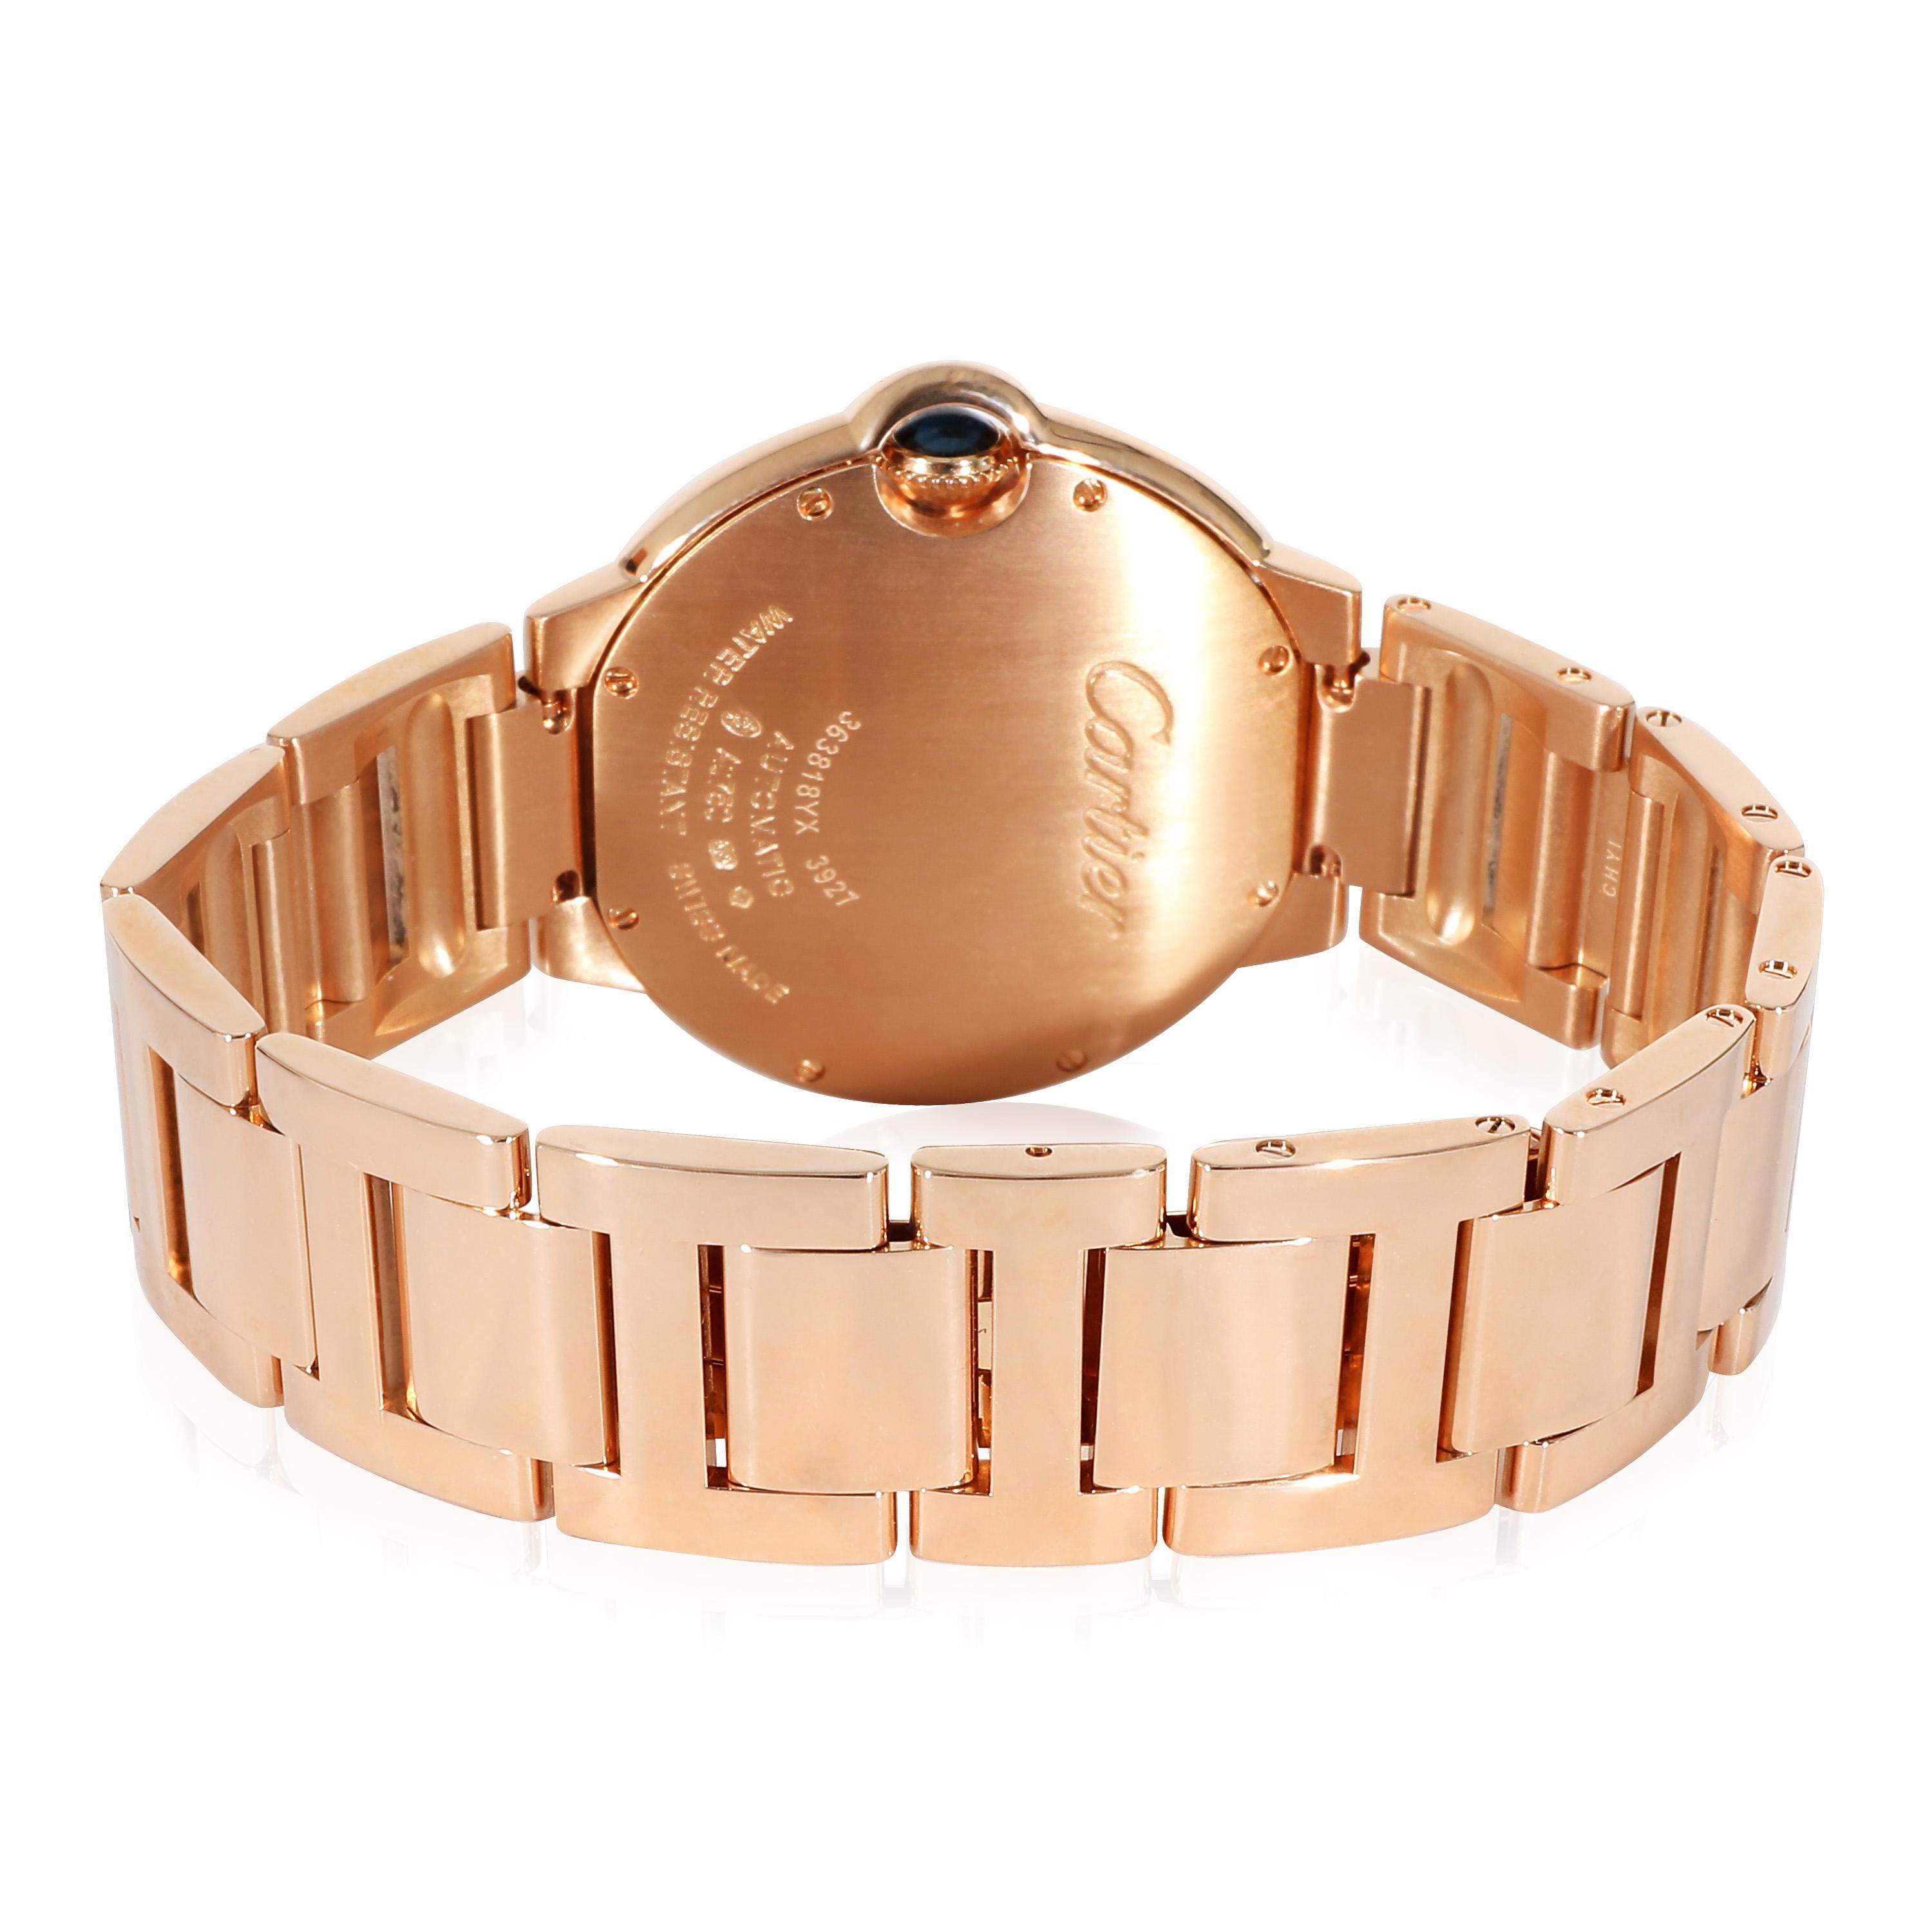 Cartier Ballon Bleu WJBB0037 Unisex Watch in 18k Rose Gold

SKU: 135319

PRIMARY DETAILS
Brand:  Cartier
Model: Ballon Bleu
Country of Origin: Switzerland
Movement Type: Mechanical: Automatic/Kinetic
Year Manufactured: 2020
Year of Manufacture: